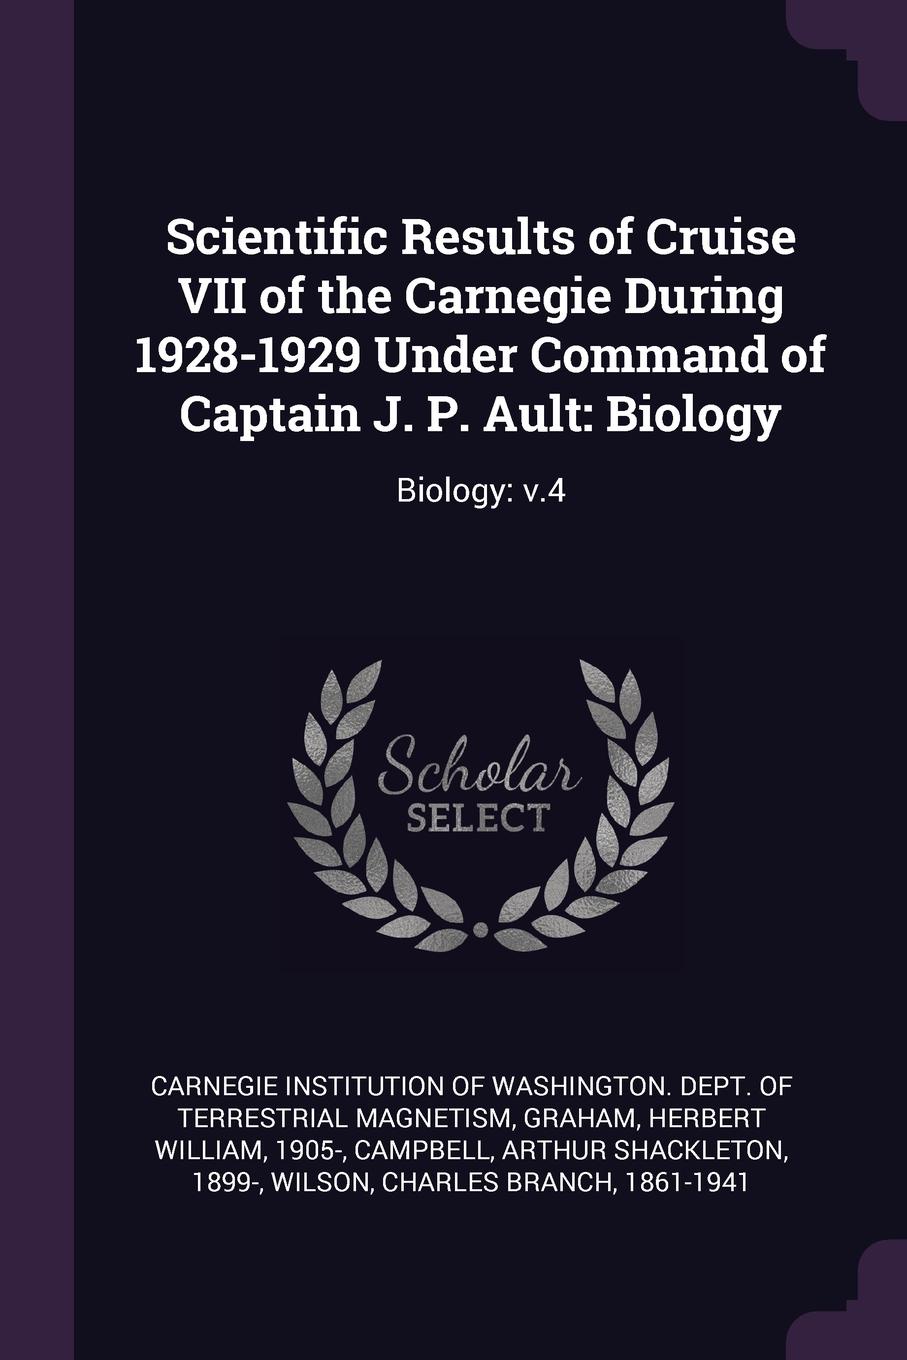 Scientific Results of Cruise VII of the Carnegie During 1928-1929 Under Command of Captain J. P. Ault. Biology: Biology: v.4